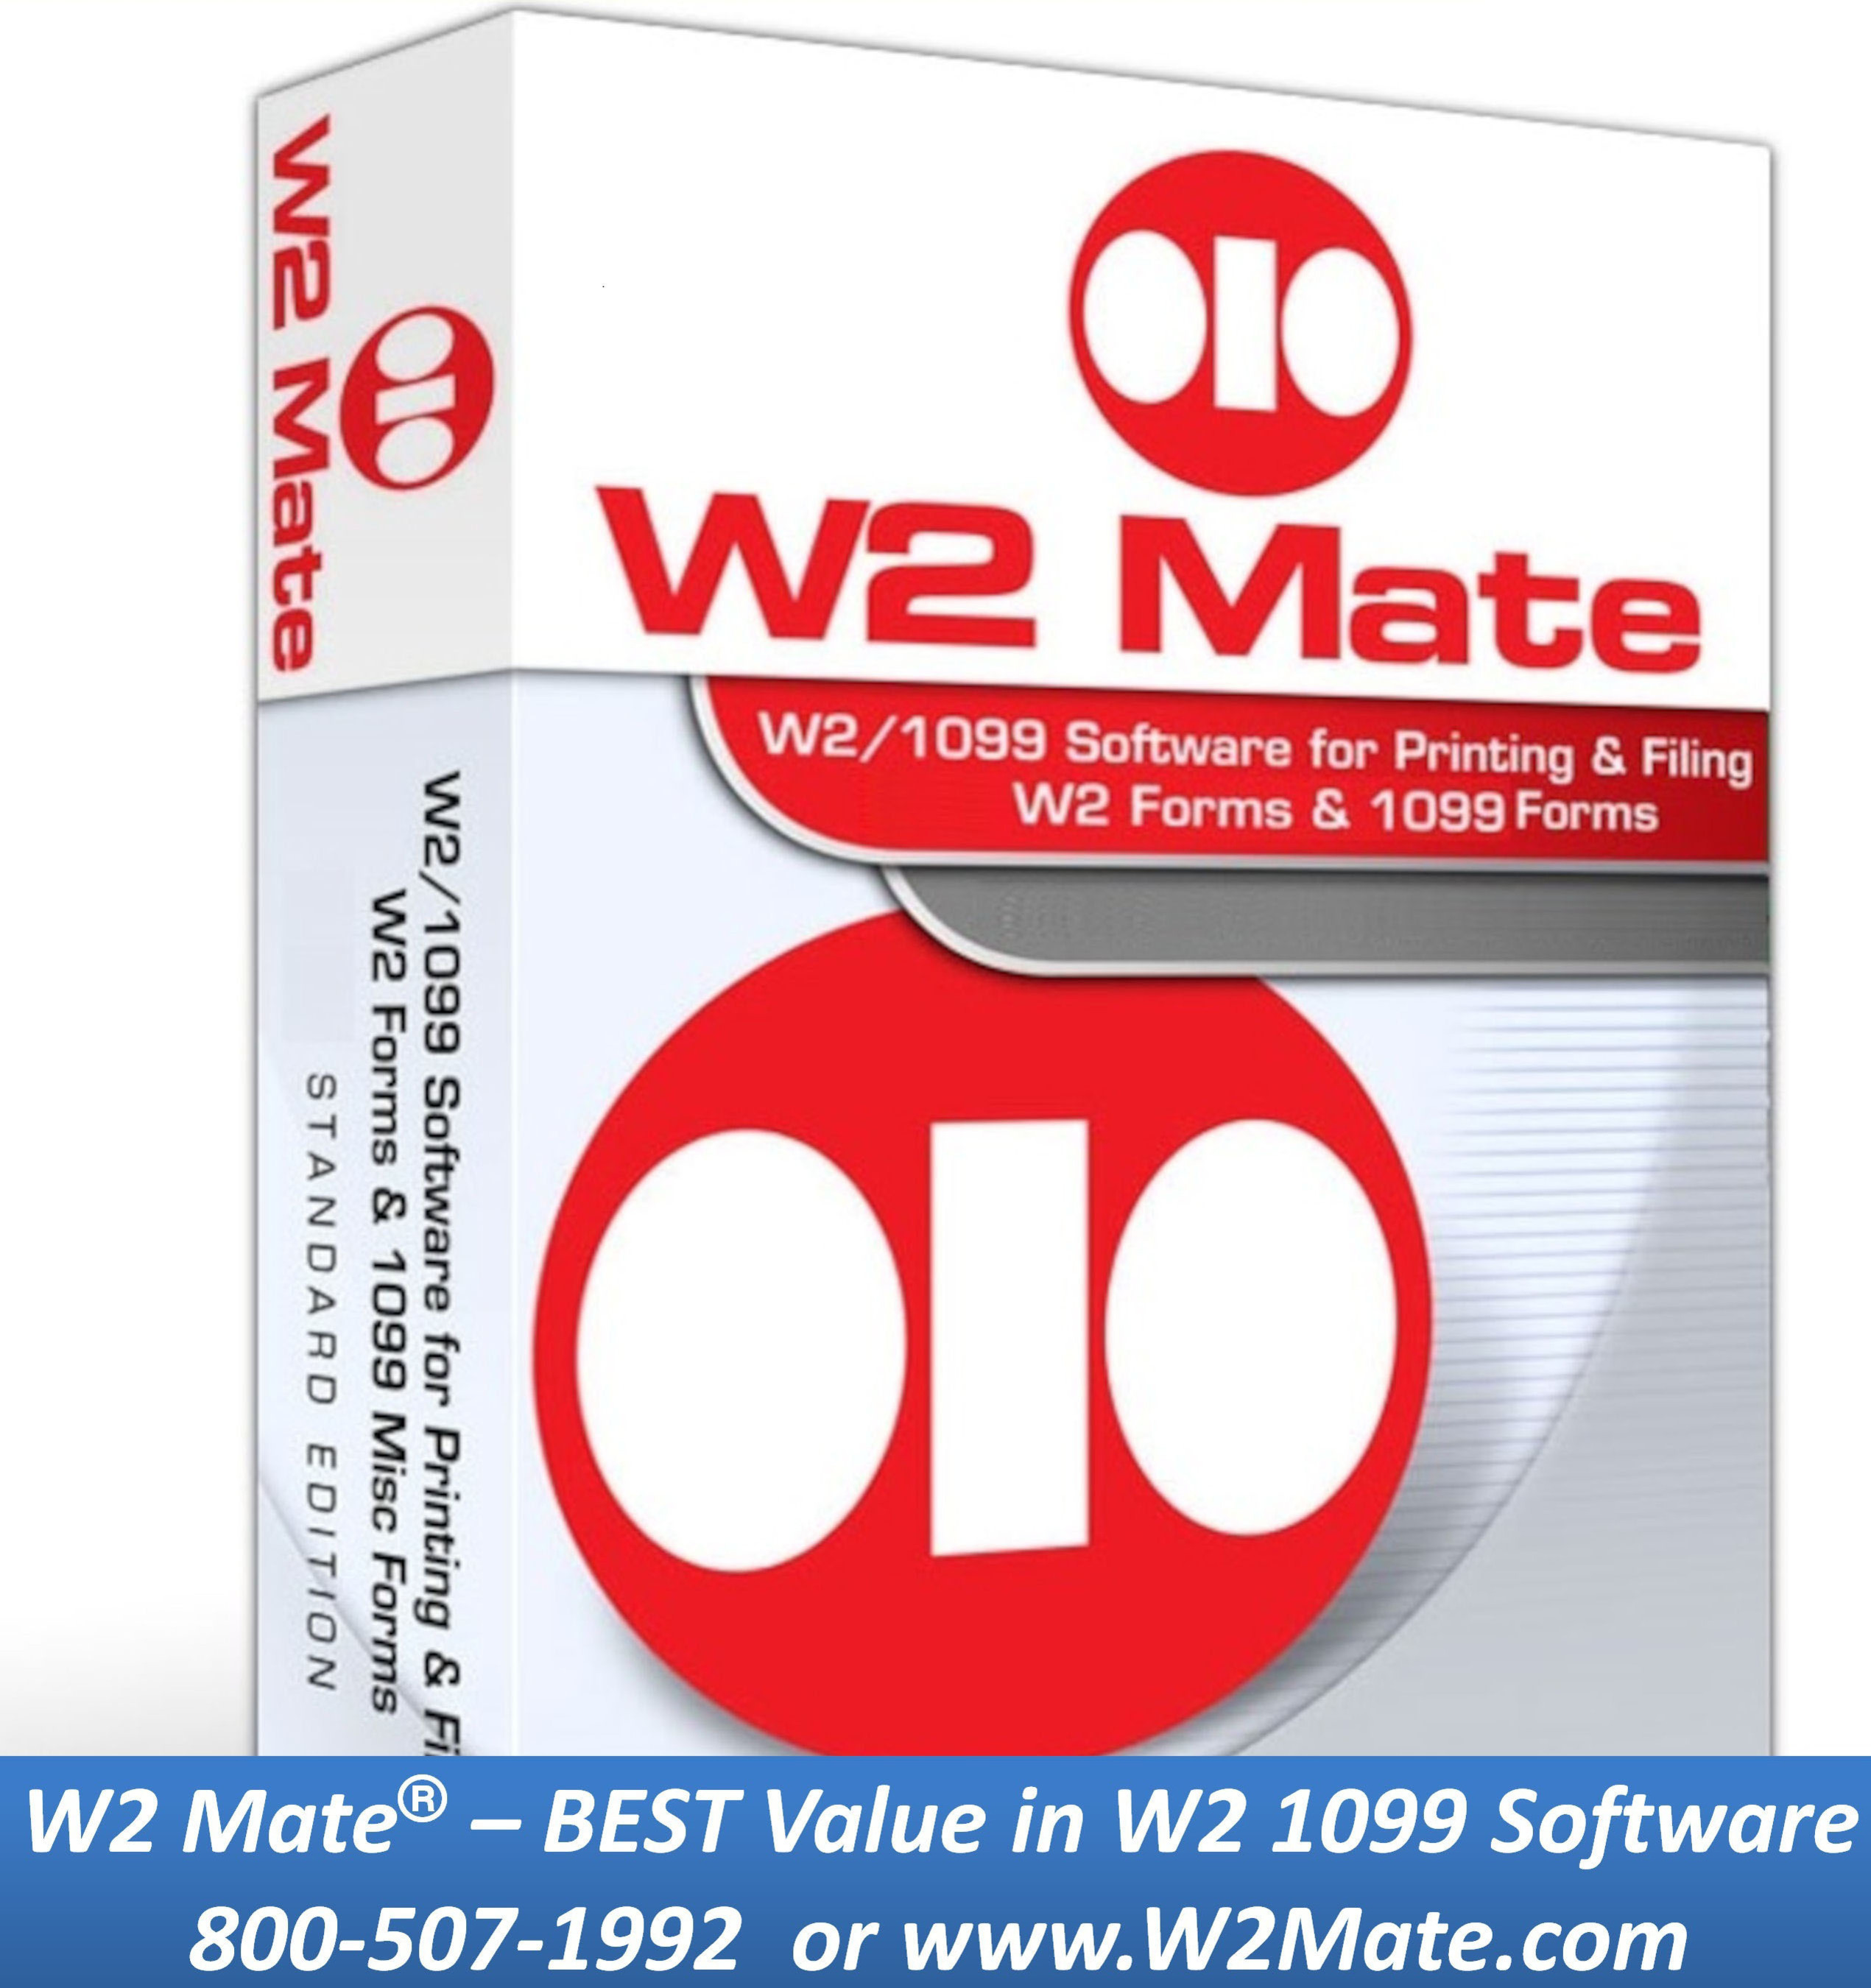 Real Business Solutions has been developing year-end compliance software and solutions for small business and accounting professionals since 2003. W2 Mate, the W2 1099 processing program offered by the company, provides compliance tools for paper and electronic filing of 2012 federal and state 1099, W-2 and series forms including W2, 1099-MISC, 1099-INT, 1099-DIV, 1099-R, W-3, 1096, 1099-S, 1098-T, 1098, 1099-A, 1099-B, 1099-C, 1099-K, 1099-PATR and 1099-OID. A free W2 Mate evaluation can be downloaded from http://www.W2Mate.com. Customers can purchase the software and receive it instantly. (PRNewsFoto/Real Business Solutions) (PRNewsFoto/REAL BUSINESS SOLUTIONS)